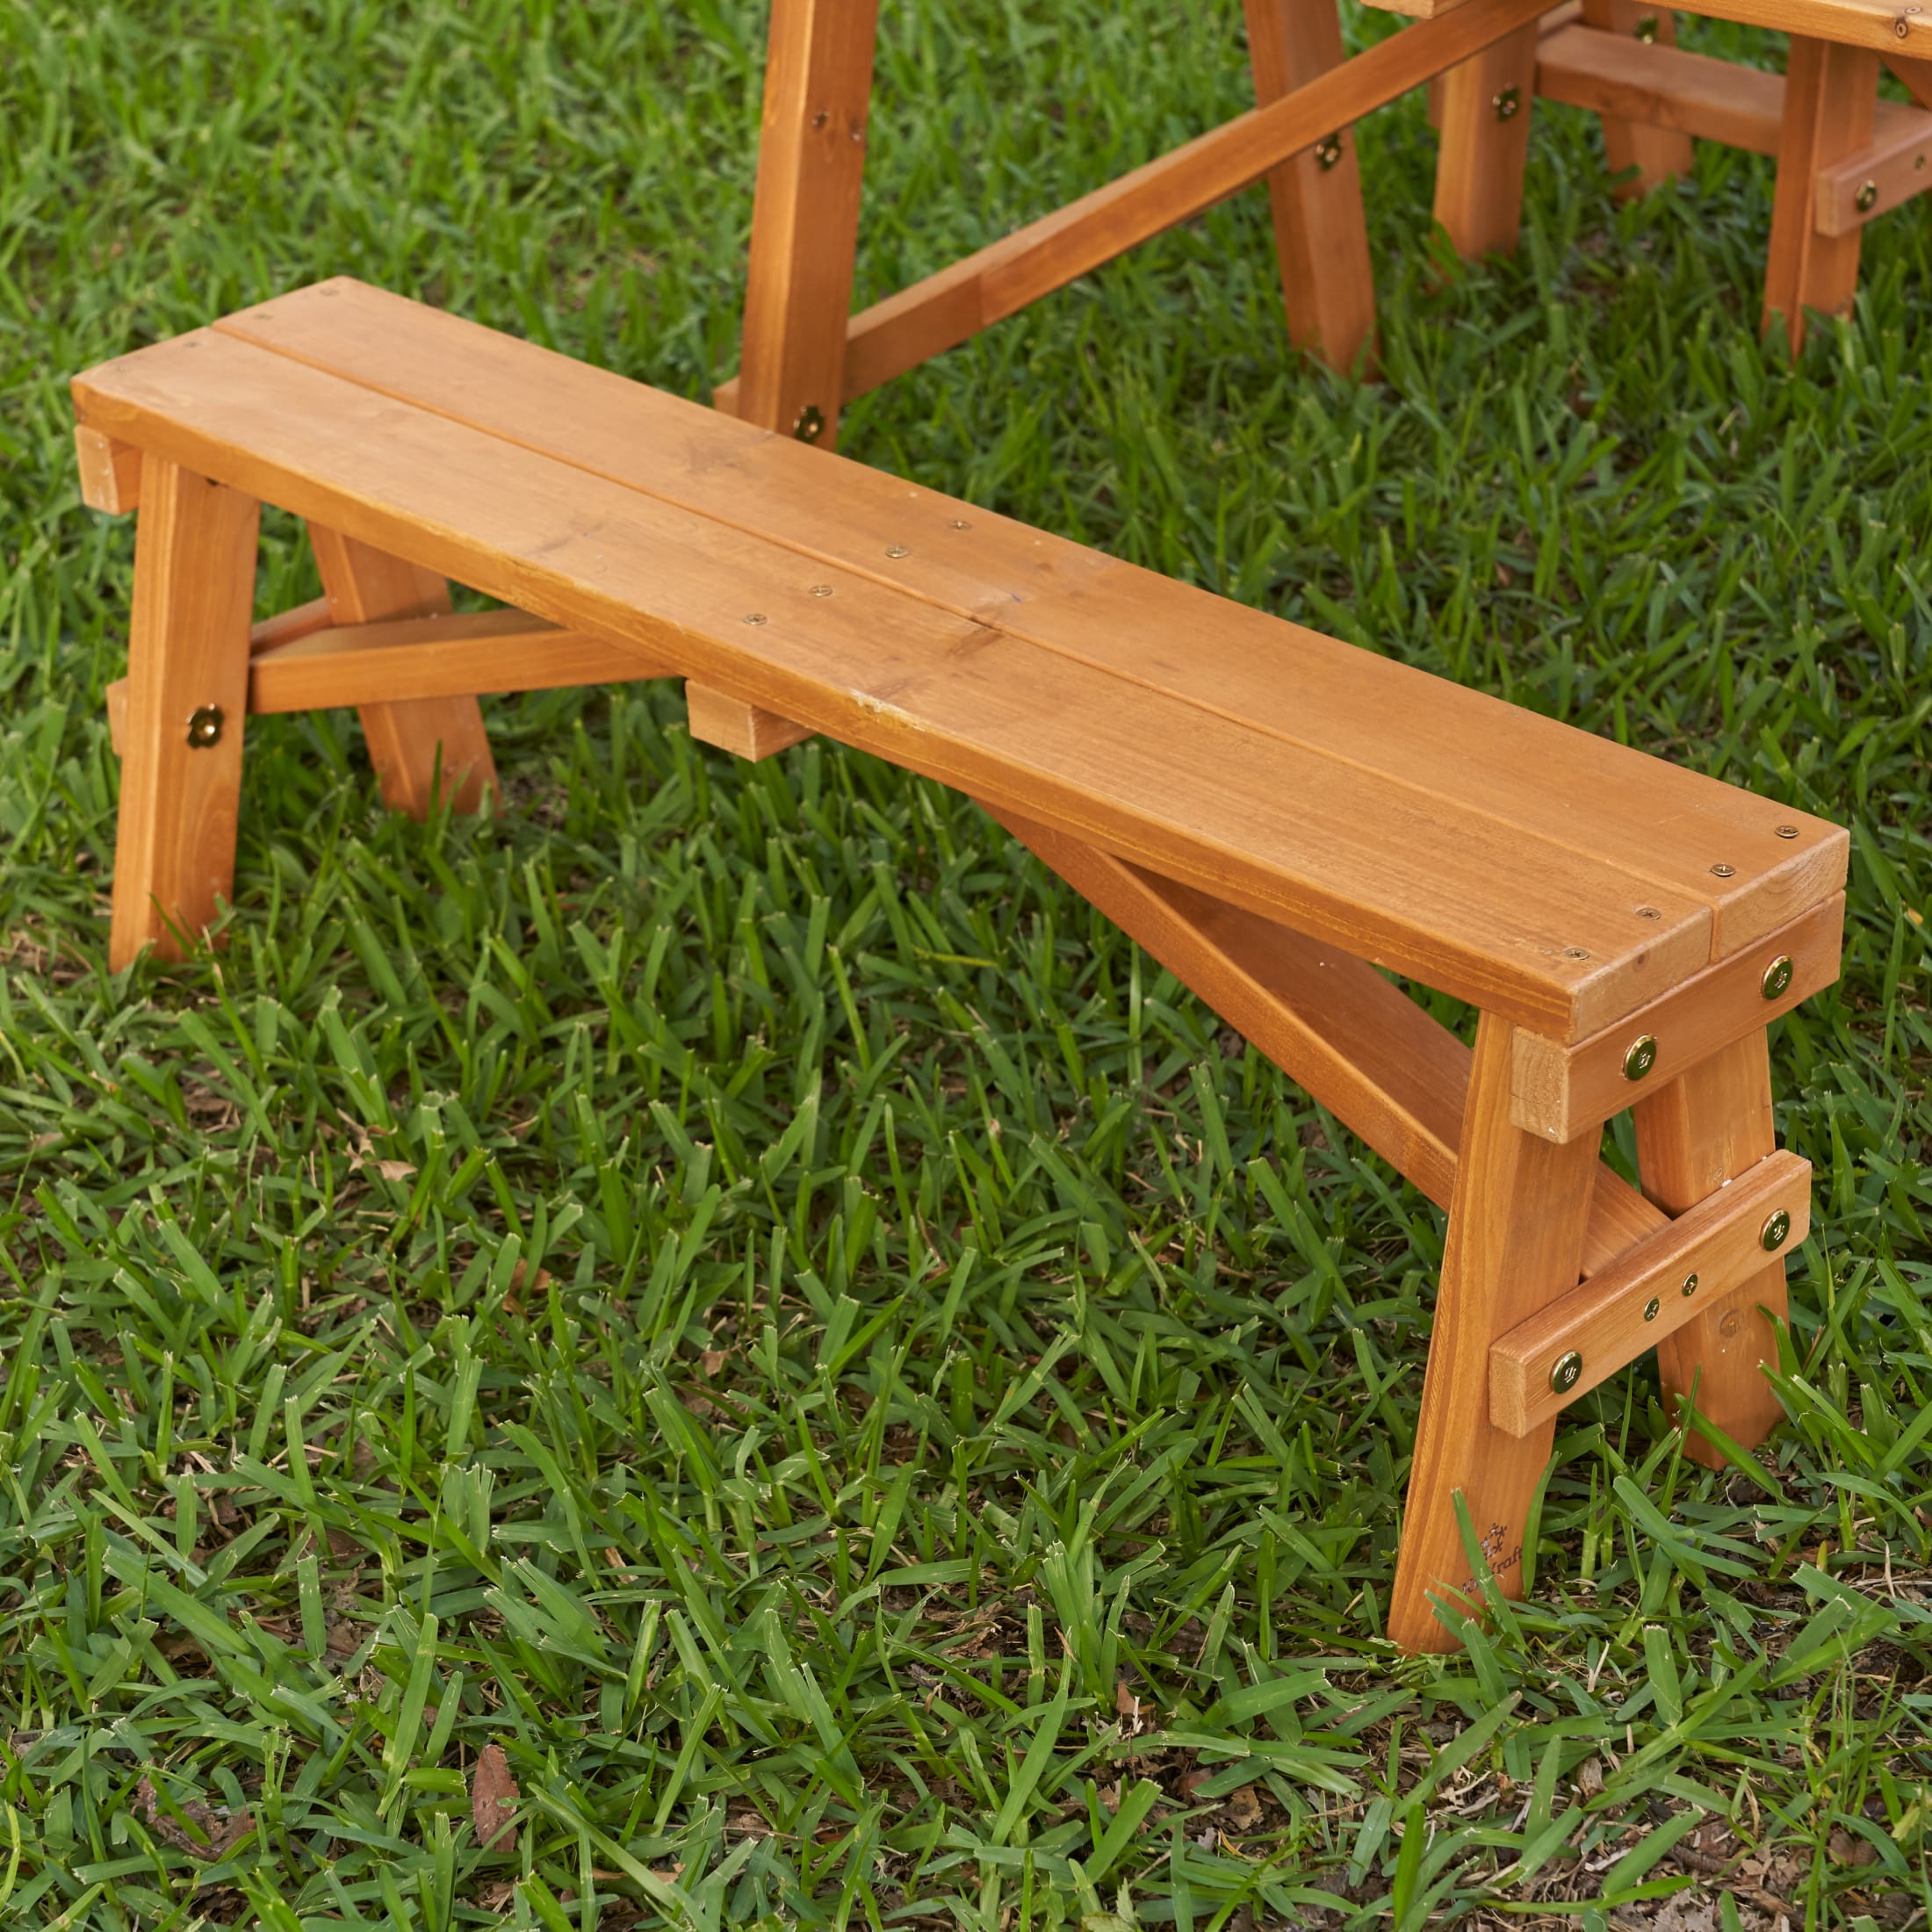 KidKraft Wooden Outdoor Picnic Table with Three Benches, Kids Patio Furniture, Amber - image 3 of 5